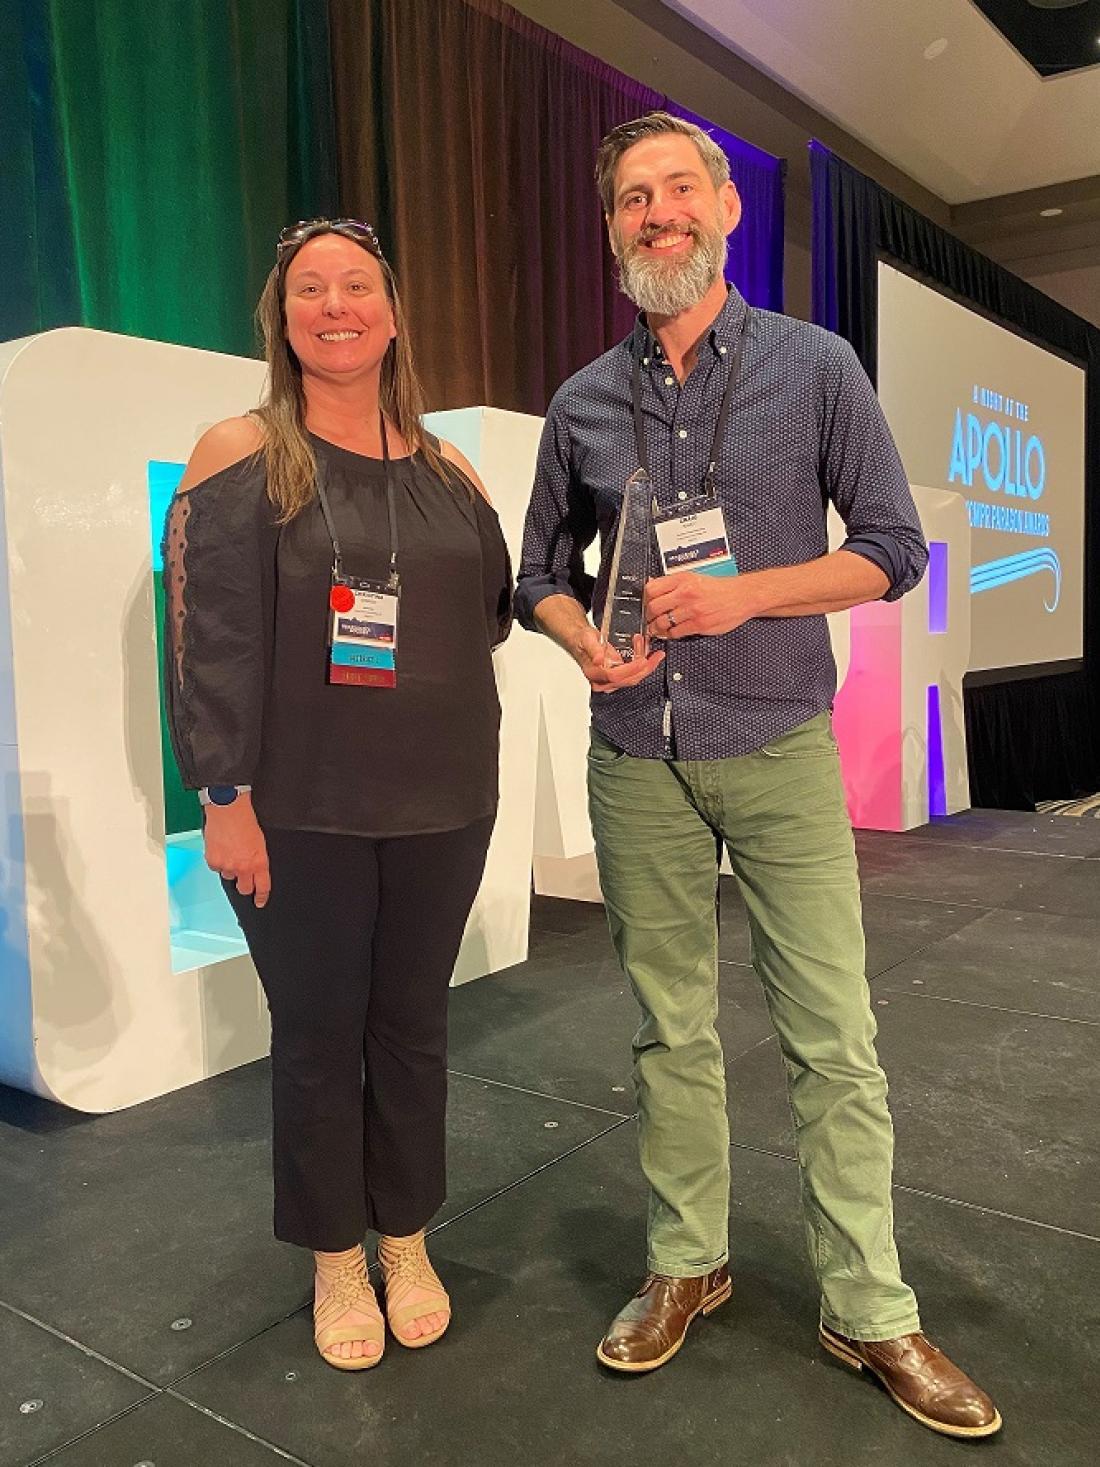 Office 365 Systems Administrator Christina Sobrido and Director of Communications Craig Ramey were fortunate to be able to attend the 2022 NCMPR national conference and accept the Paragon award in person.